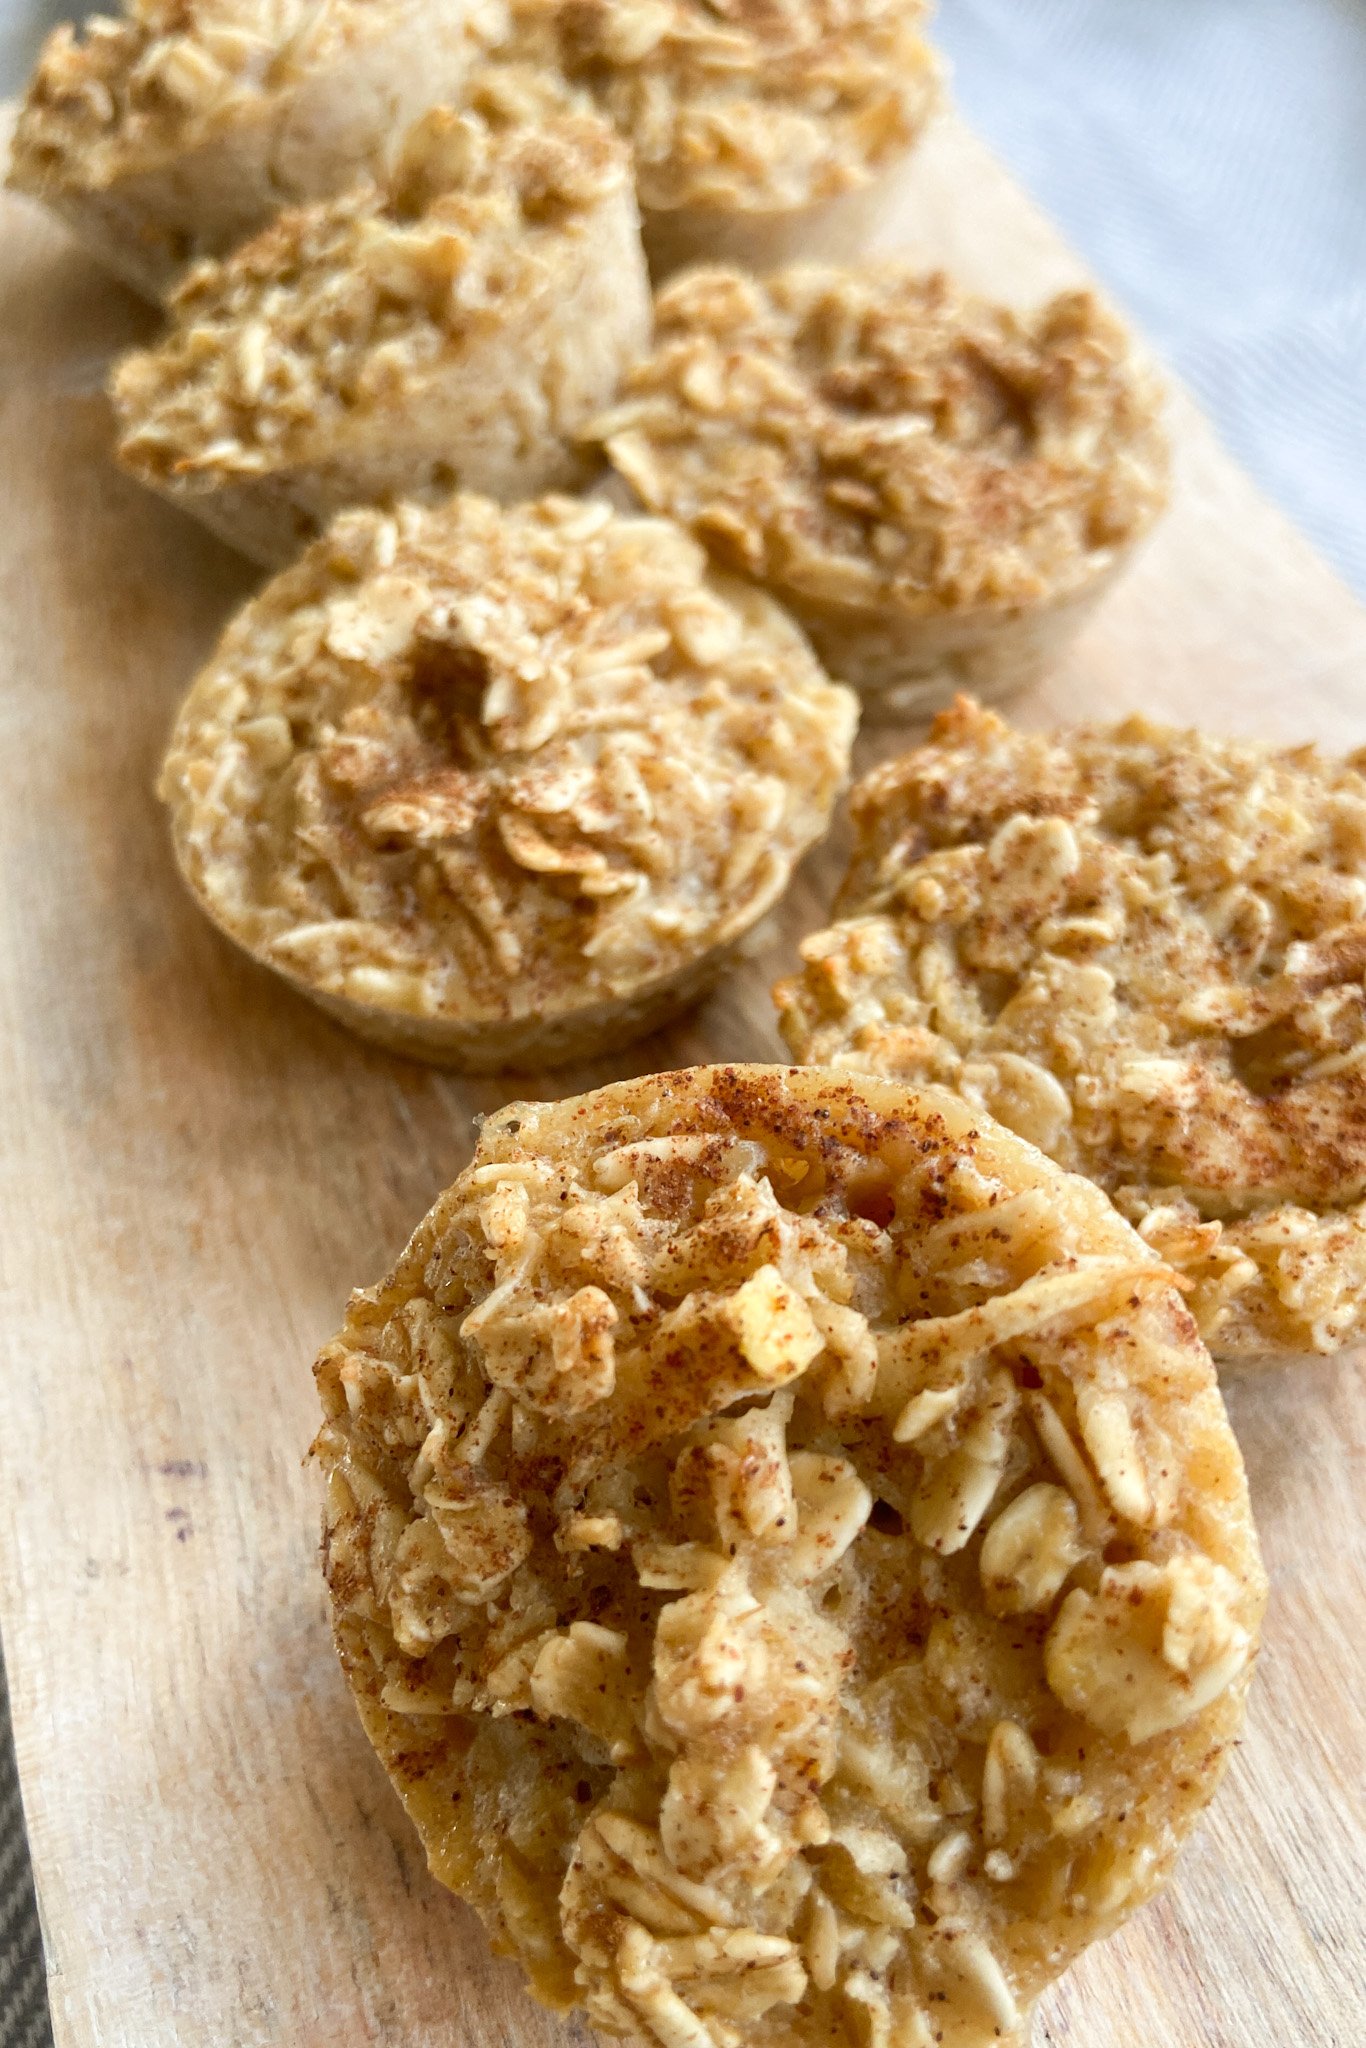 Apple oat bites served on a wooden cutting board.